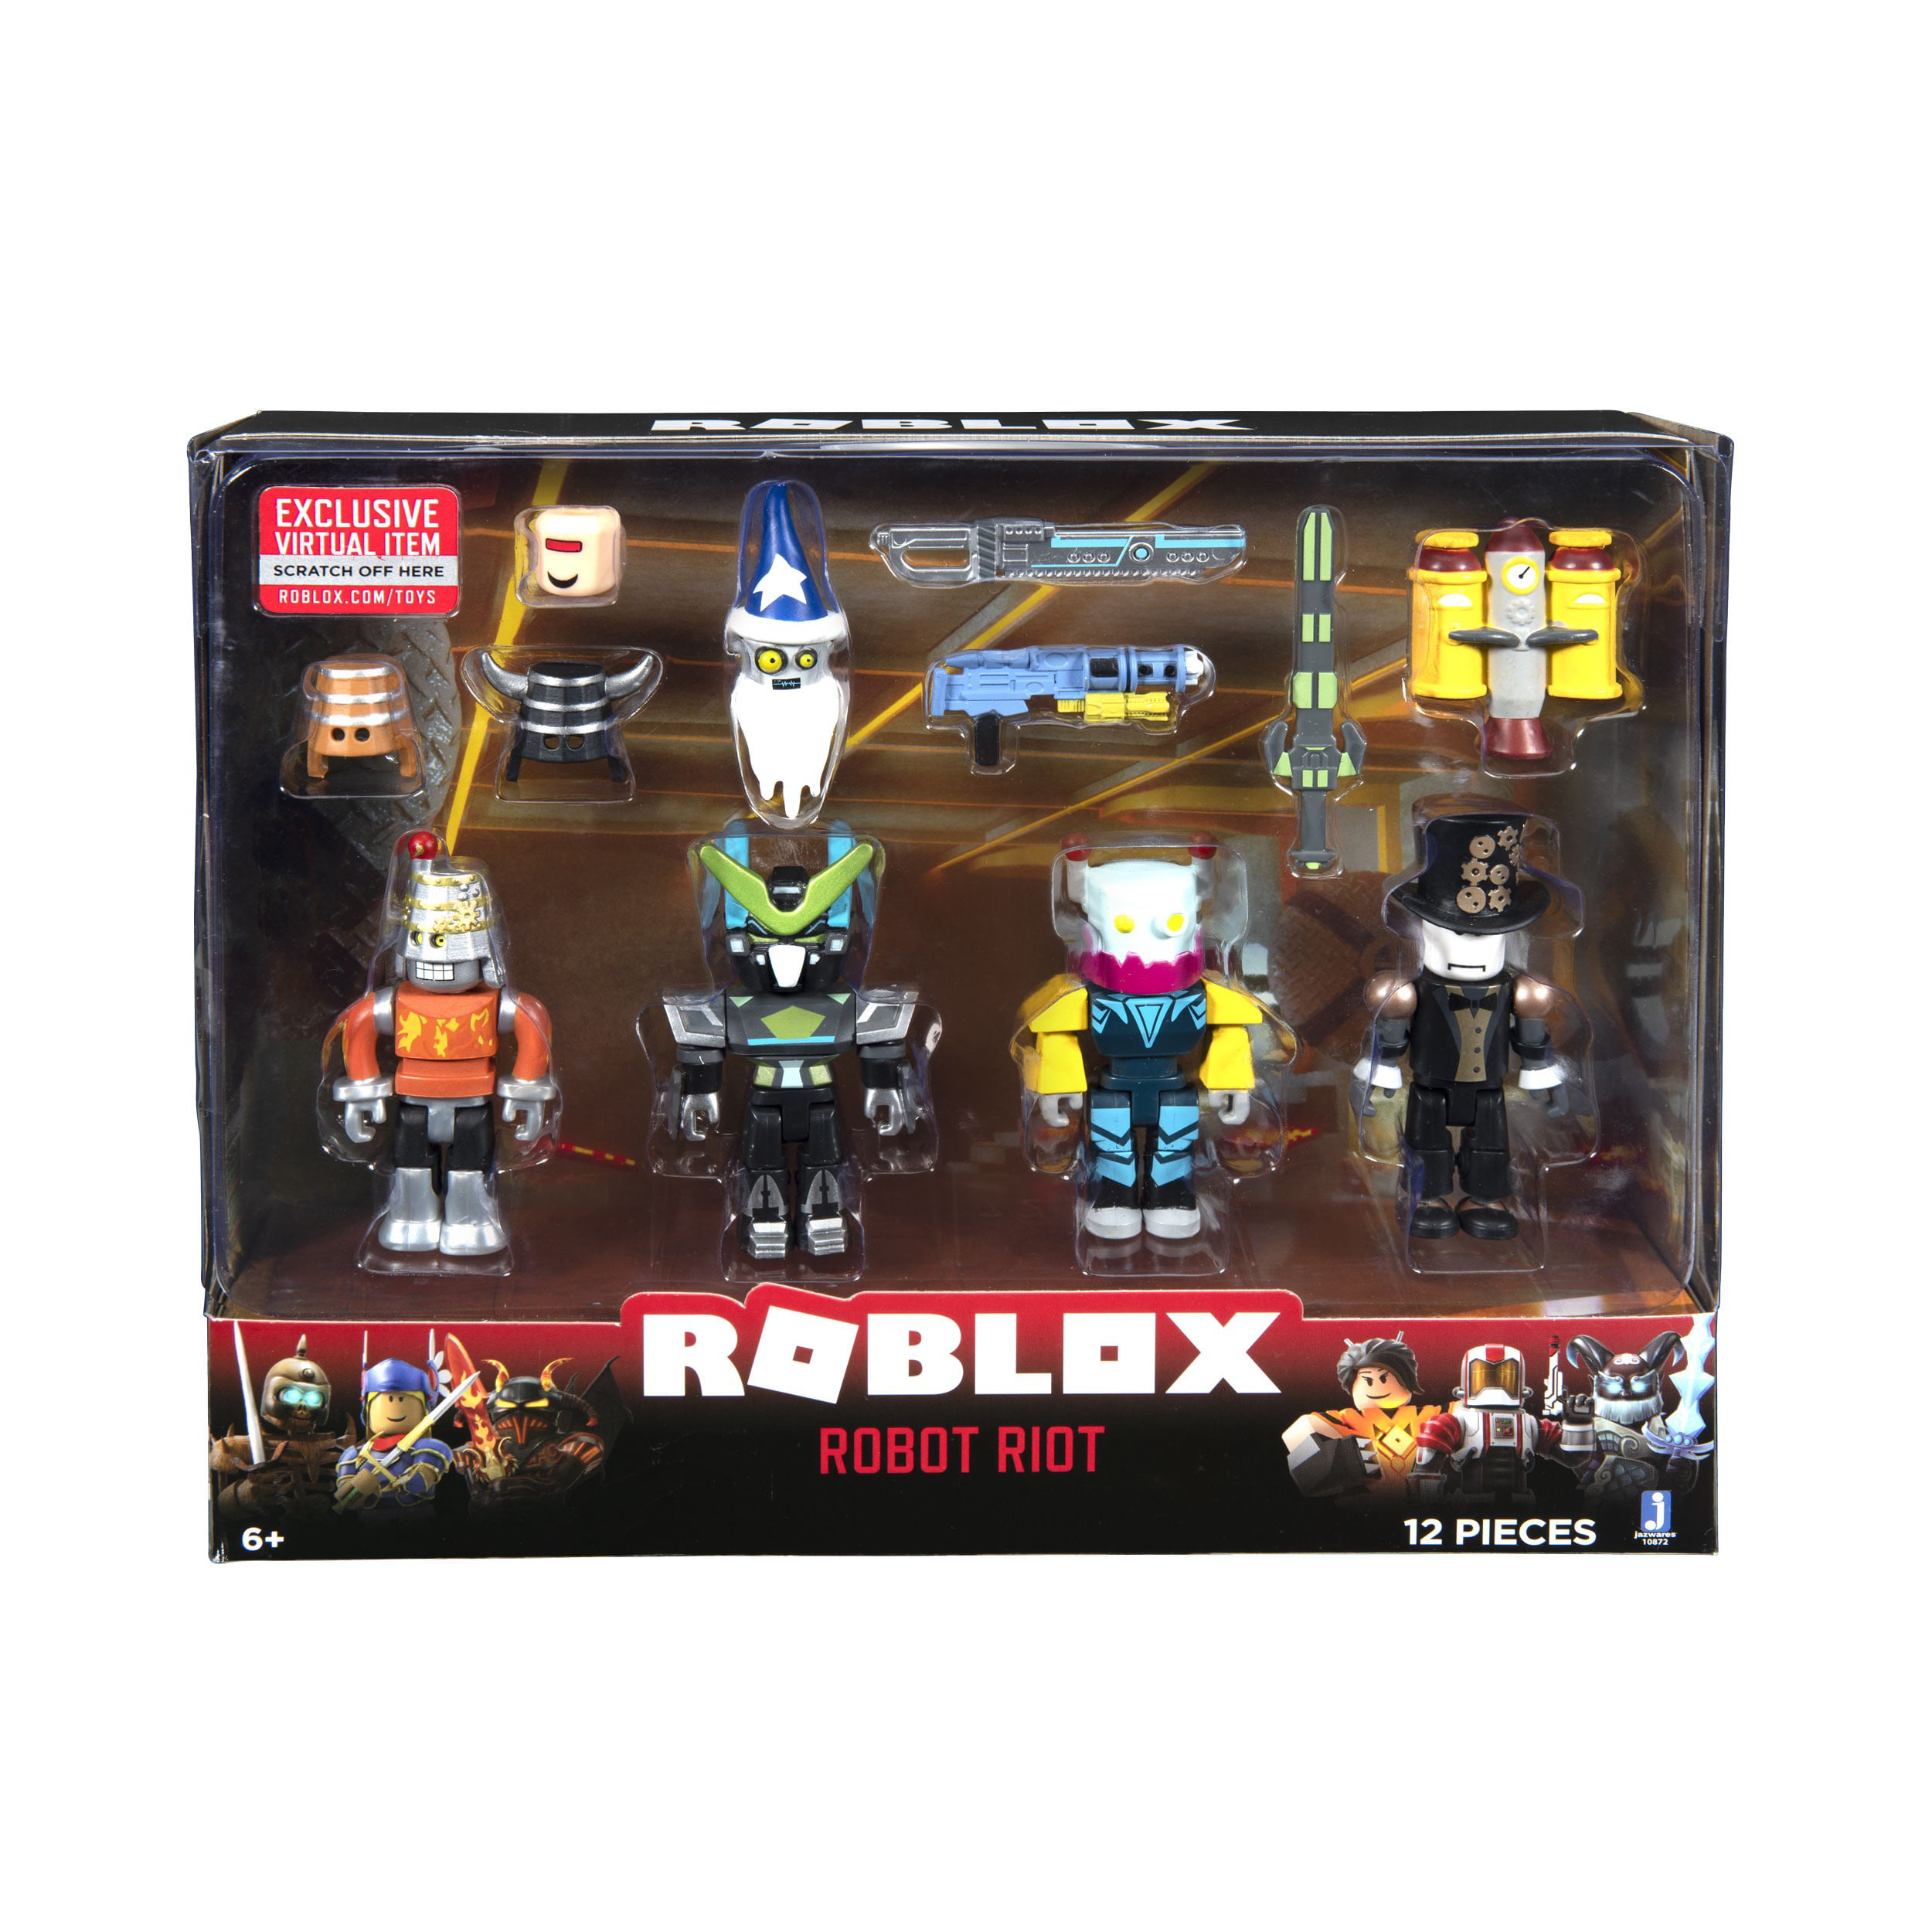 Roblox Action Collection Robot Riot Four Figure Pack Includes Exclusive Virtual Item Walmart Com Walmart Com - details about roblox robot riot mix match set pvc game toy kids gift with box uk free pp